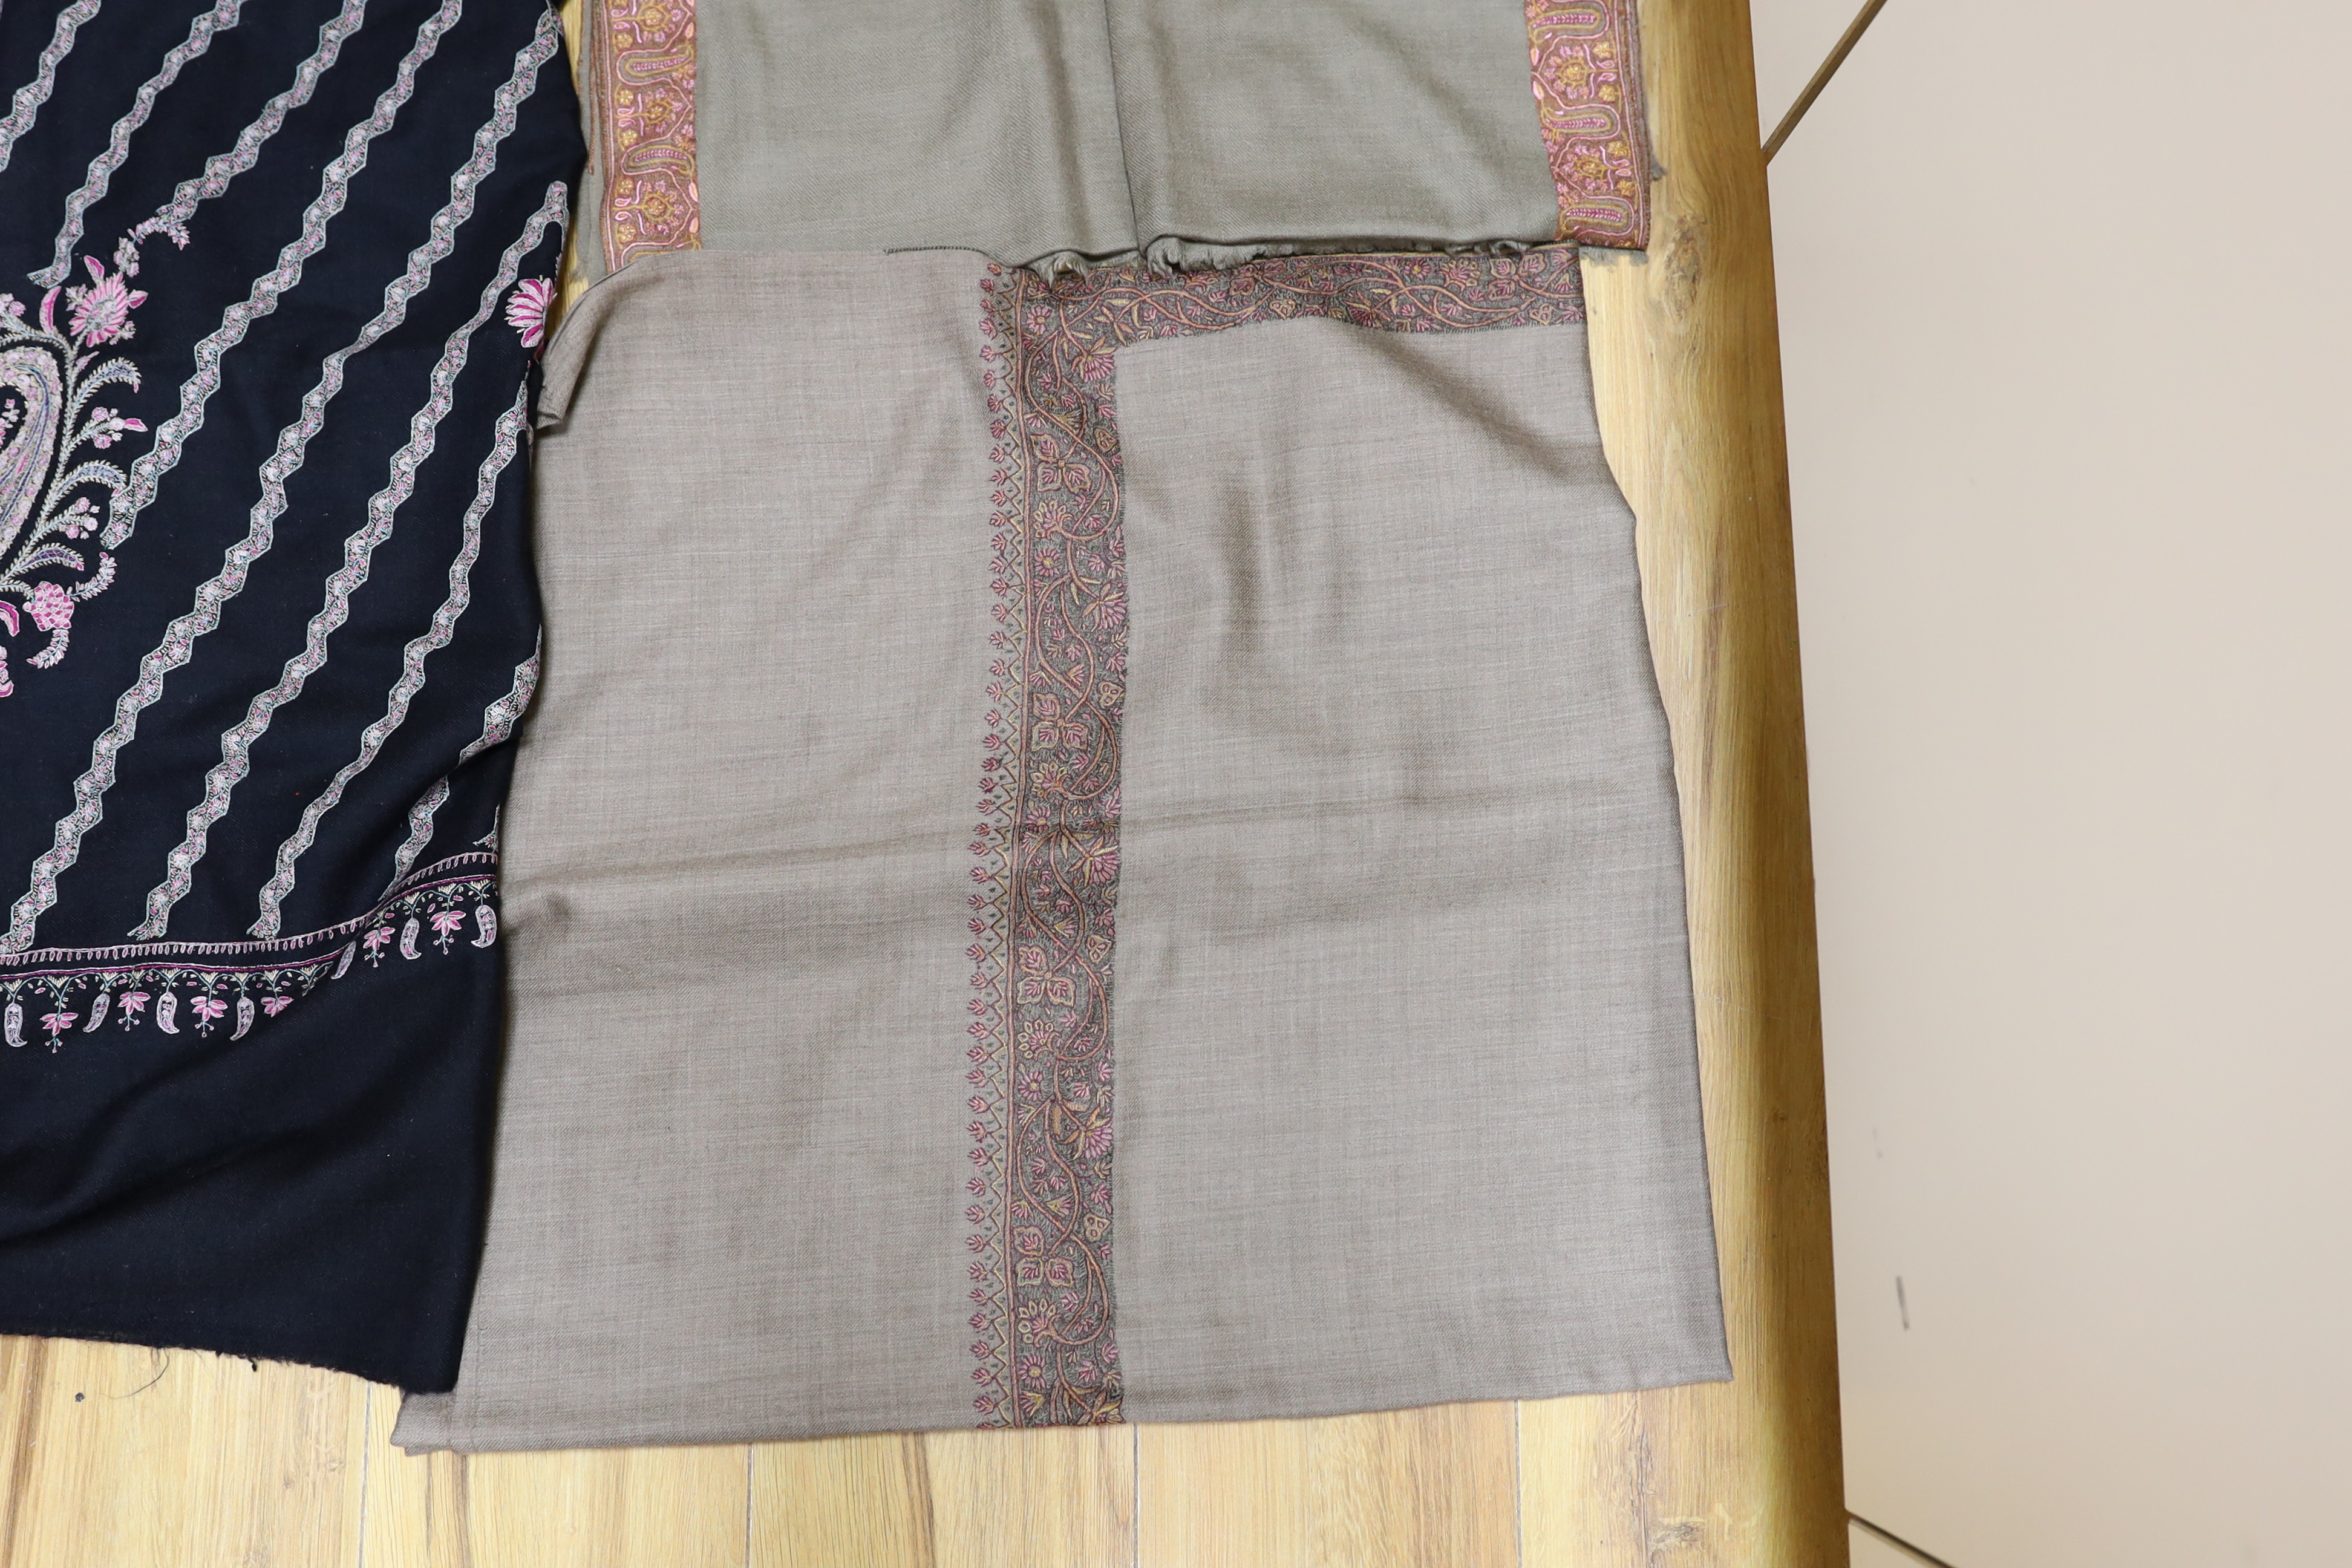 Four Indian wool and cashmere shawls, three silk embroidered